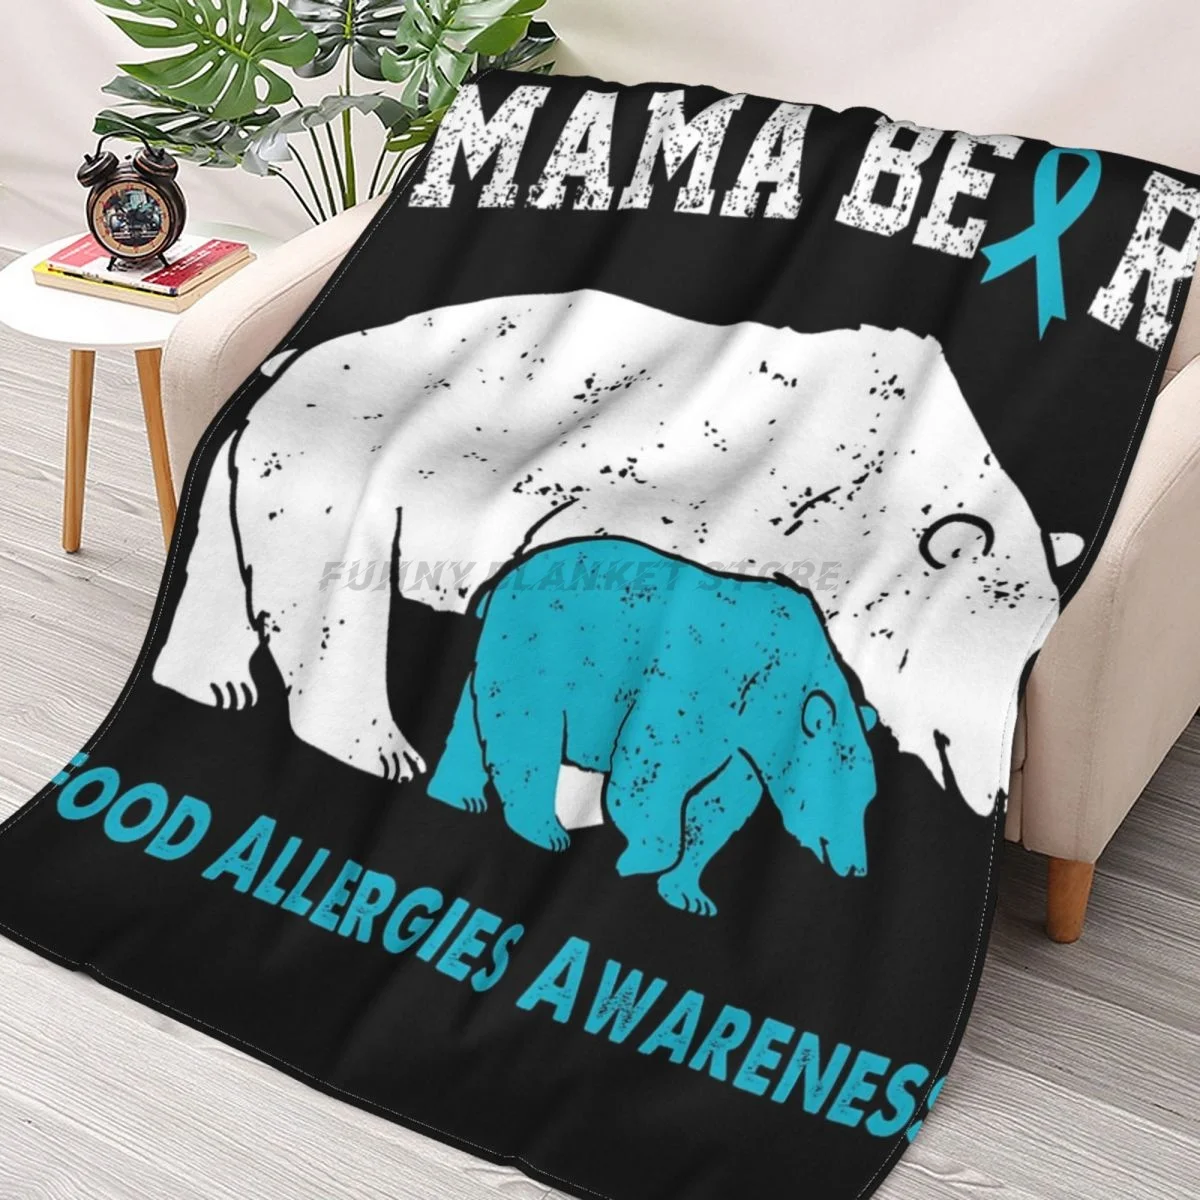 

FOOD ALLERGIES Awareness Bear Lover Gifts Throws Blankets Collage Flannel Ultra-Soft Warm picnic blanket bedspread on the bed